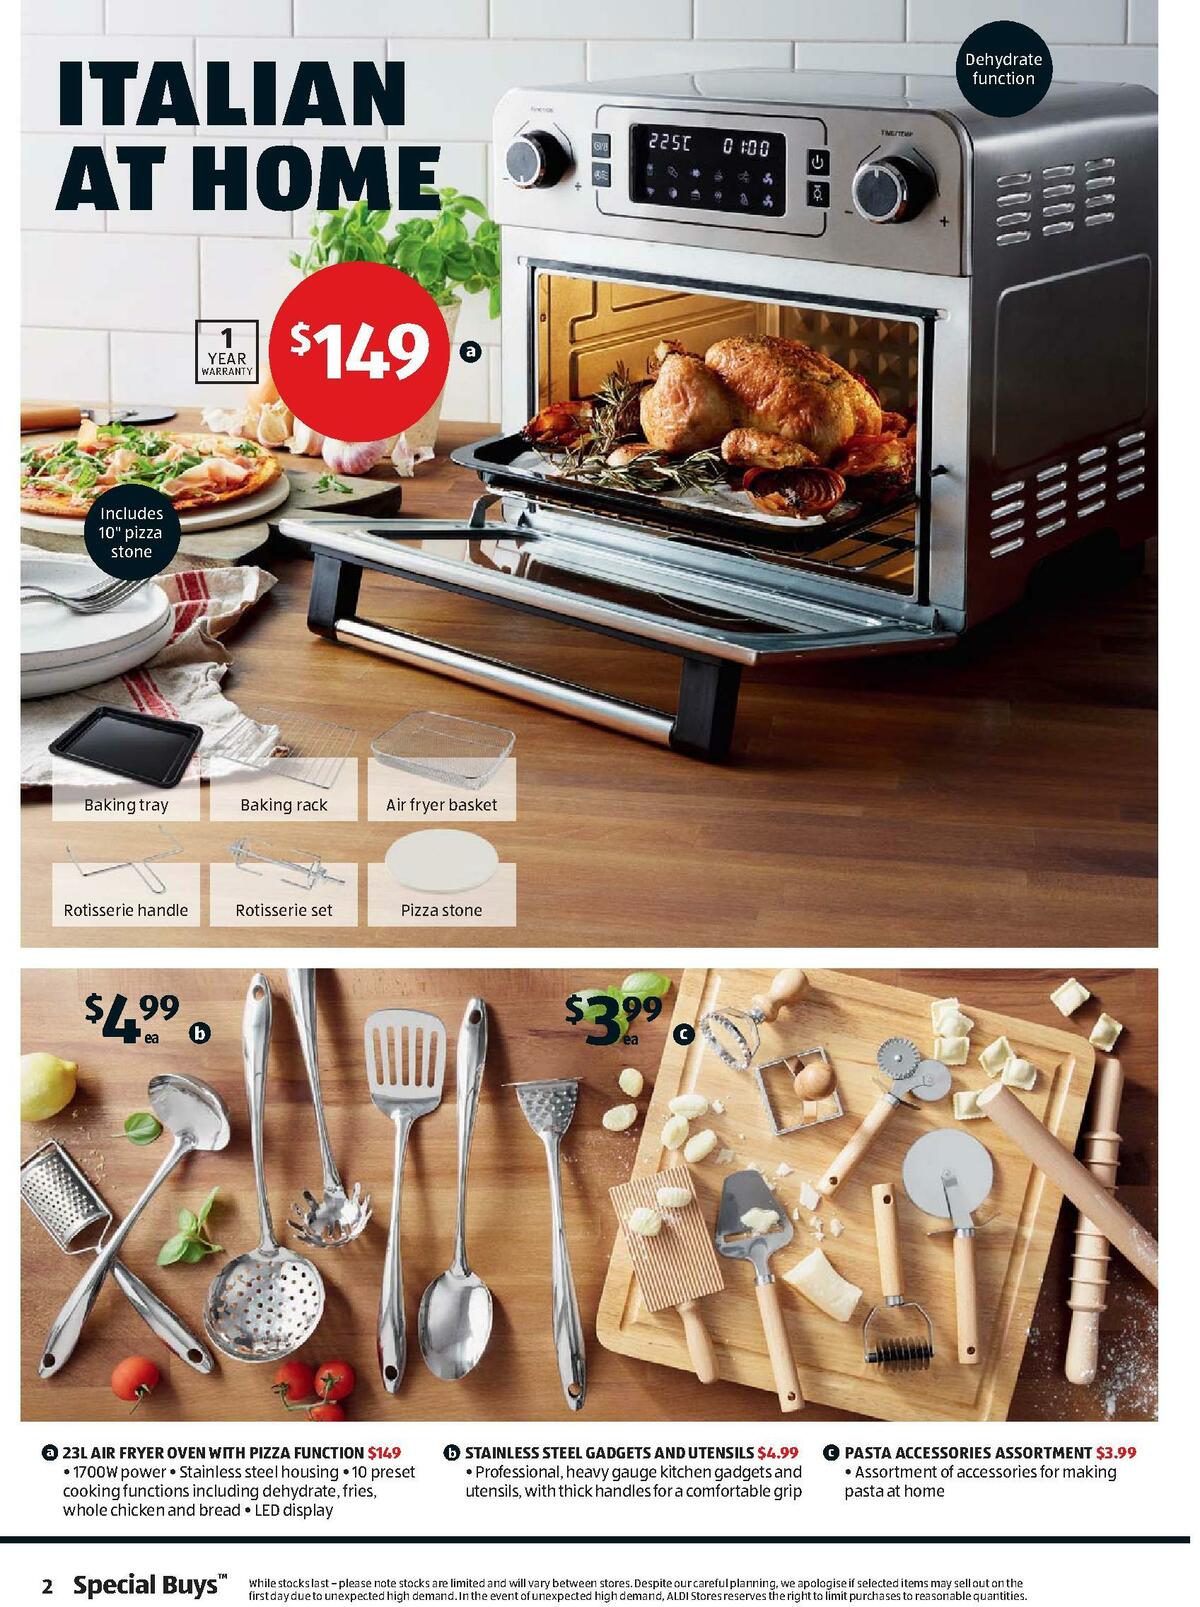 ALDI Catalogues from 24 June